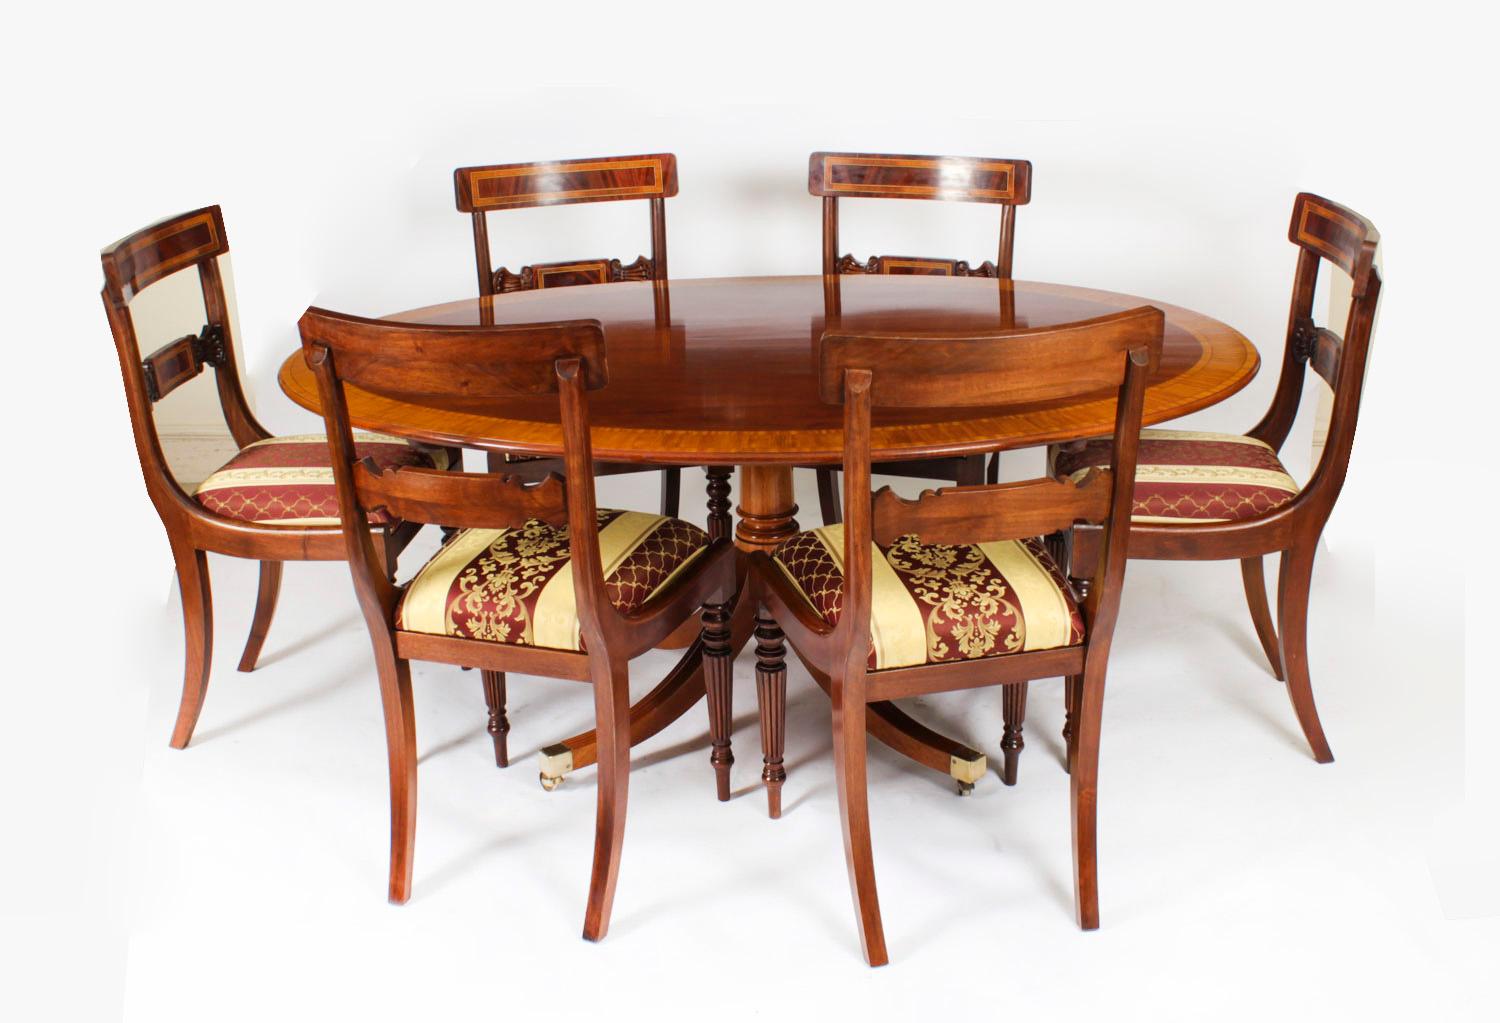 This is a beautiful Regency Revival flame mahogany and Satinwood banded oval dining table  that was made by the Master Cabinet maker William Tillman and bears his label on the underside, Circa 1980 in date.  


The fabulous 5ft 6inch flame mahogany